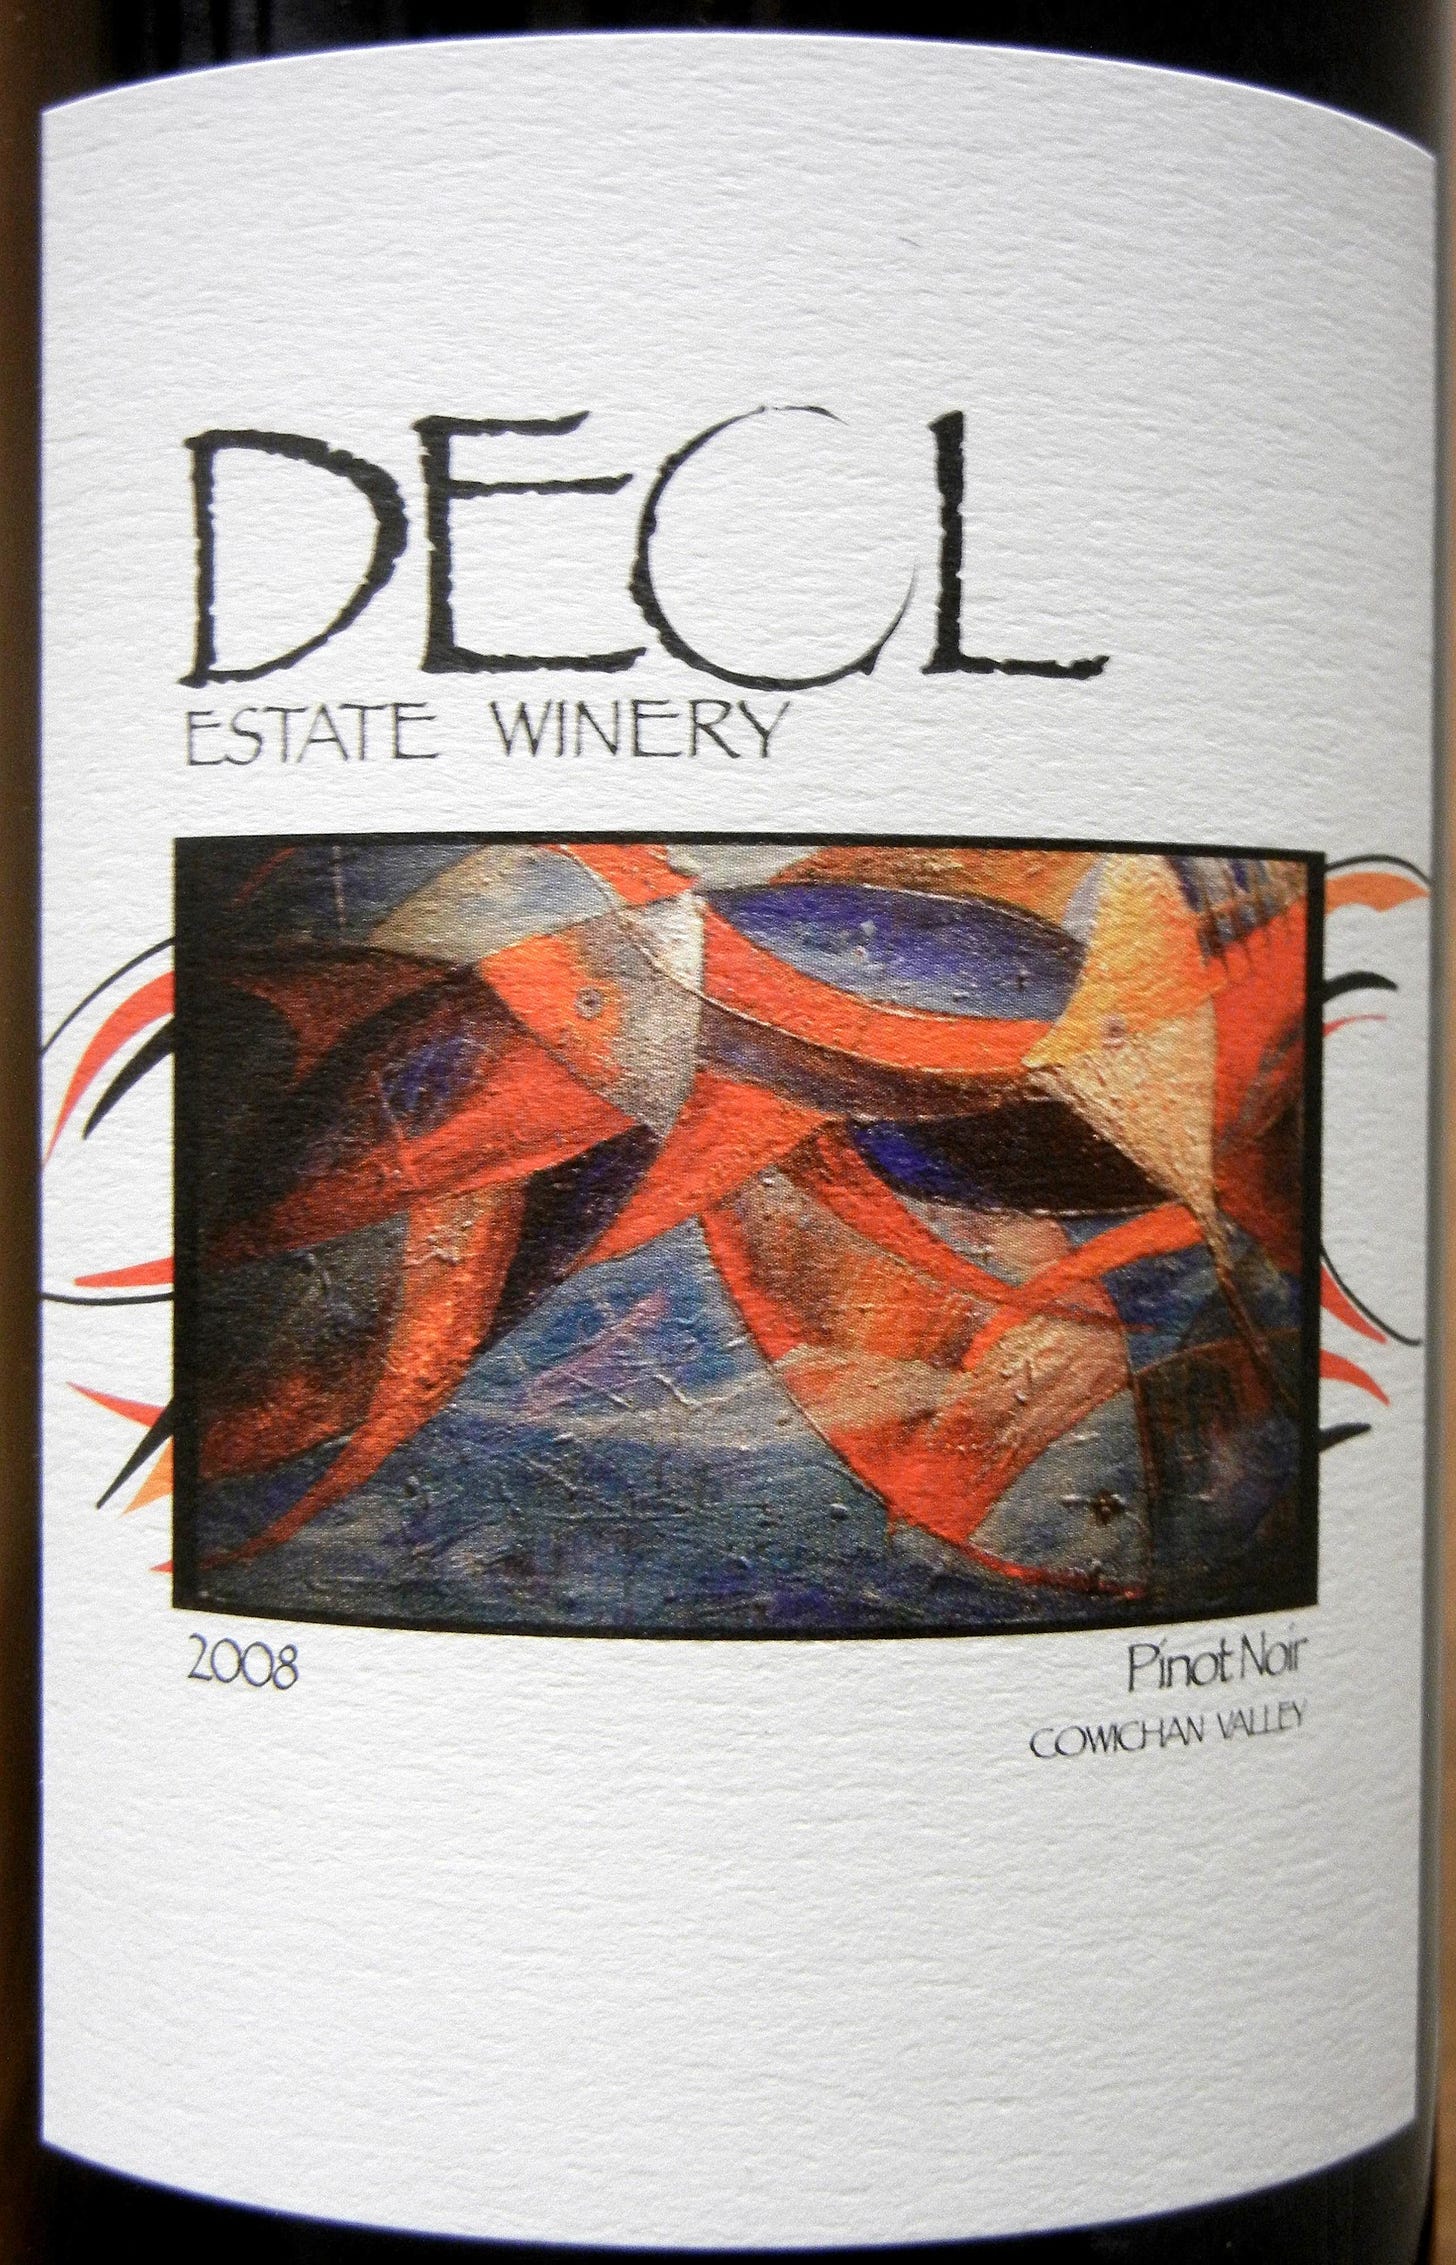 Deol Pinot Noir 2008 Label - BC Pinot Noir Tasting Review 16